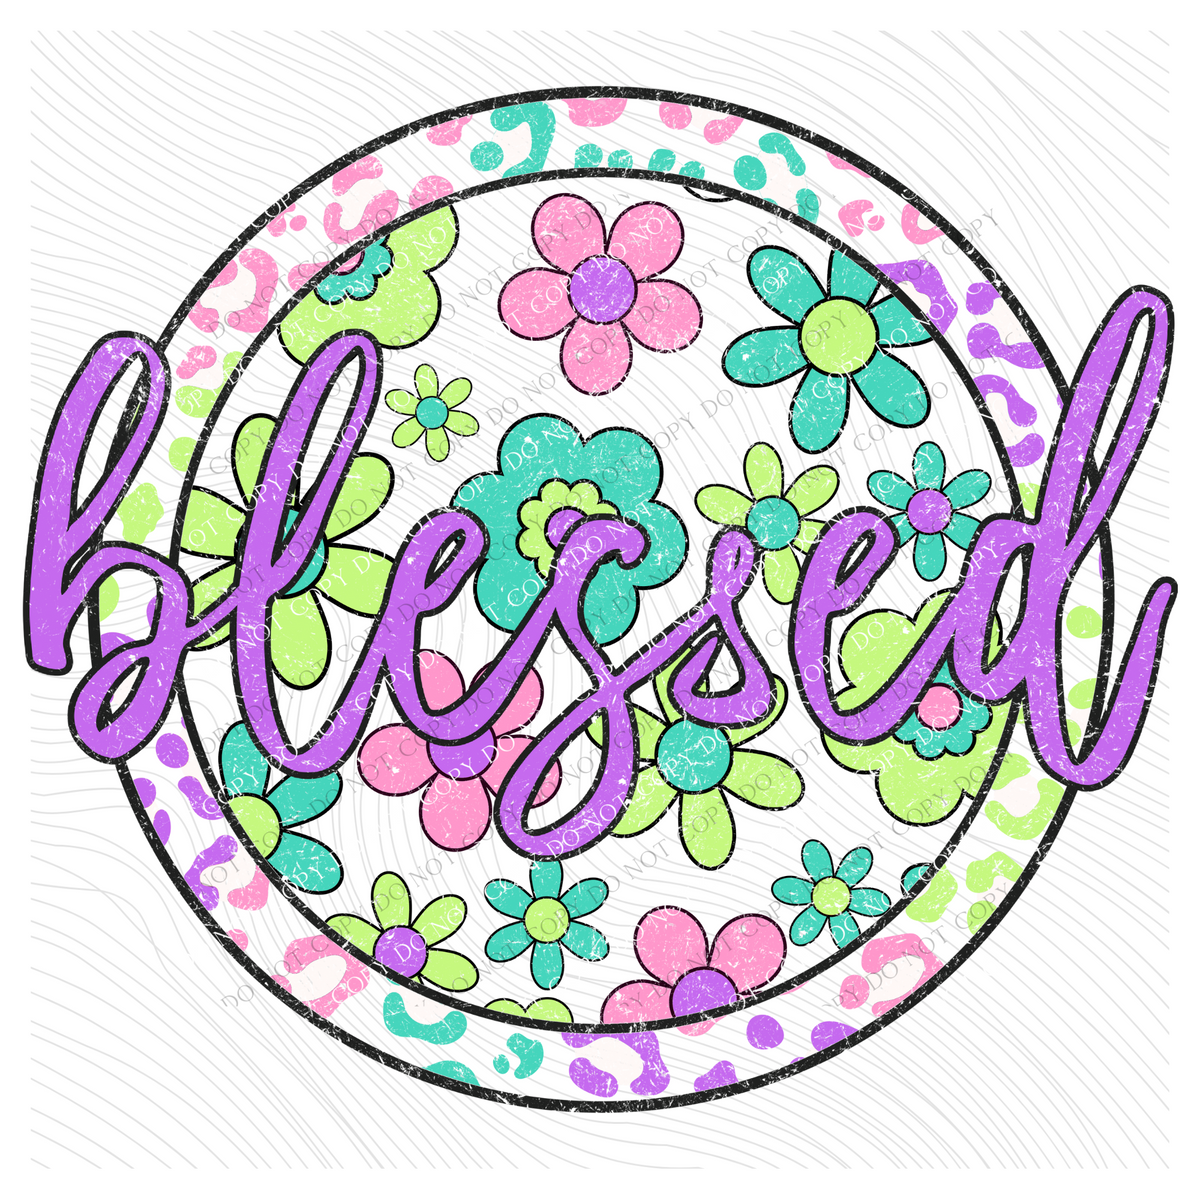 Blessed Groovy Leopard Translucent Cutout in Bright Cotton Candy Tones Digital Design, PNG